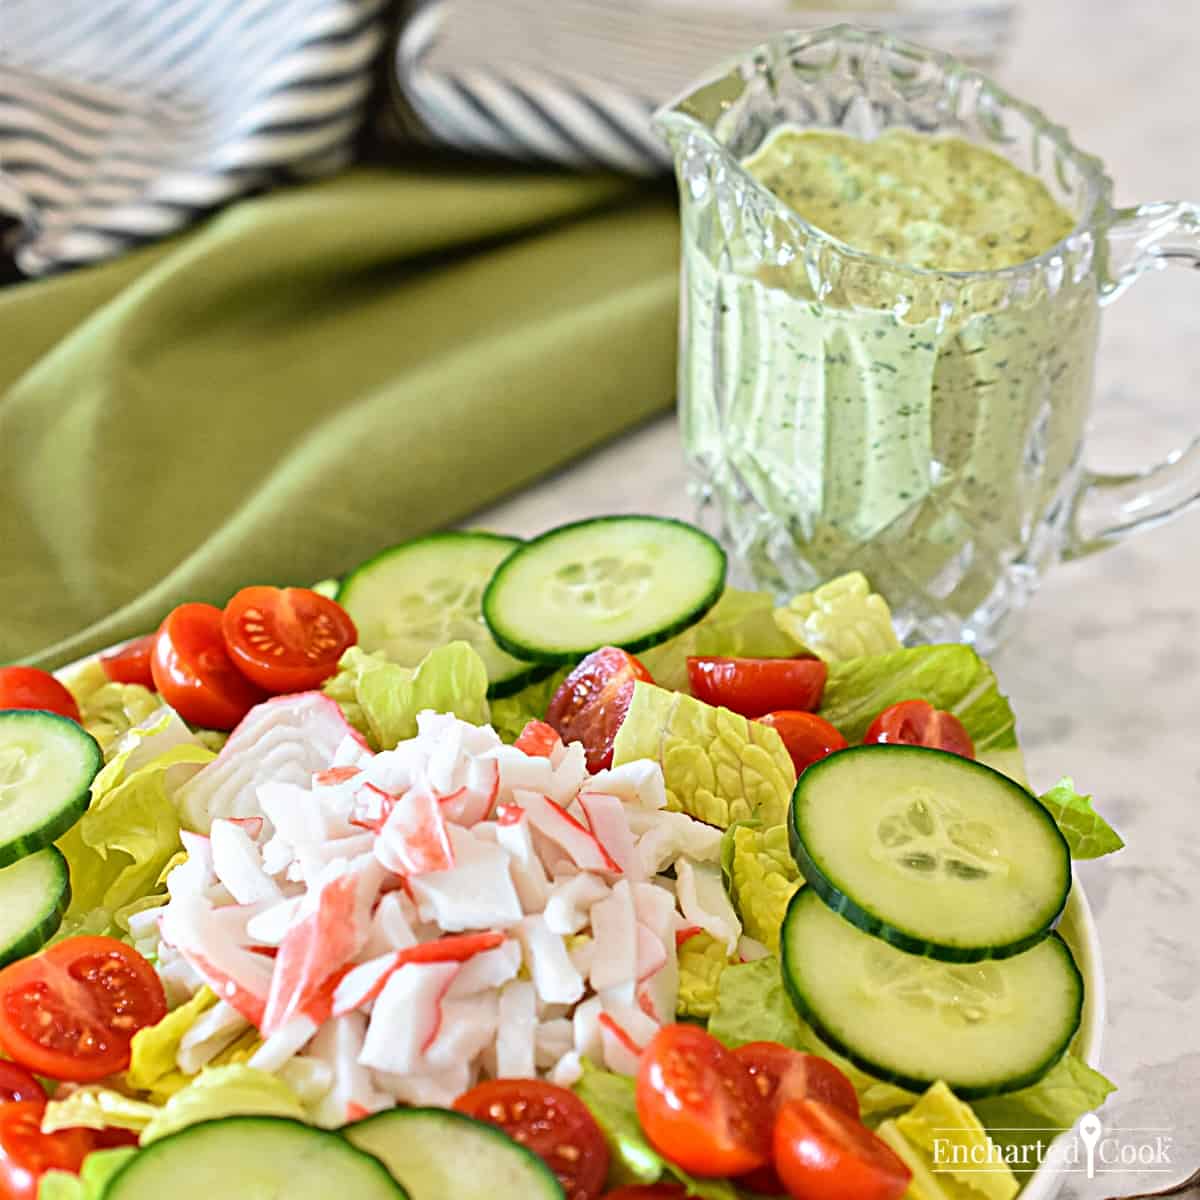 A salad of lettuce, tomato, cucumber, and krab, with green salad dressing in a crystal pitcher.